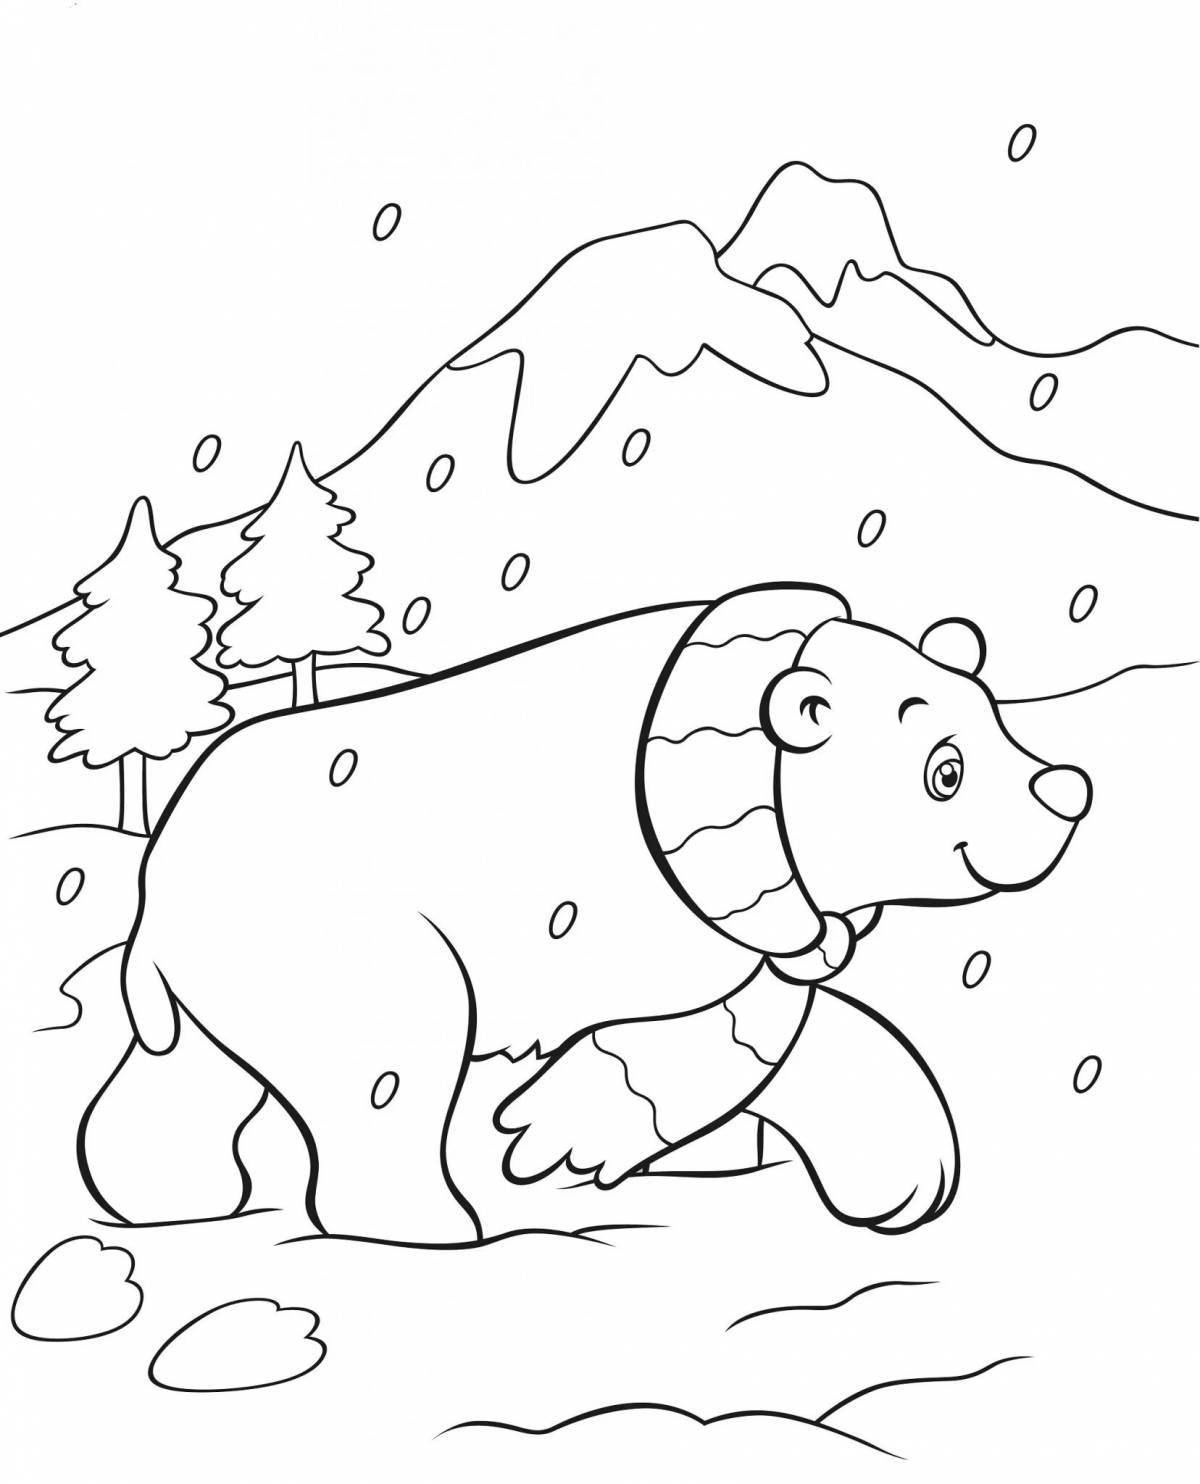 Shiny Nordic Animals Coloring Pages for Kindergarten